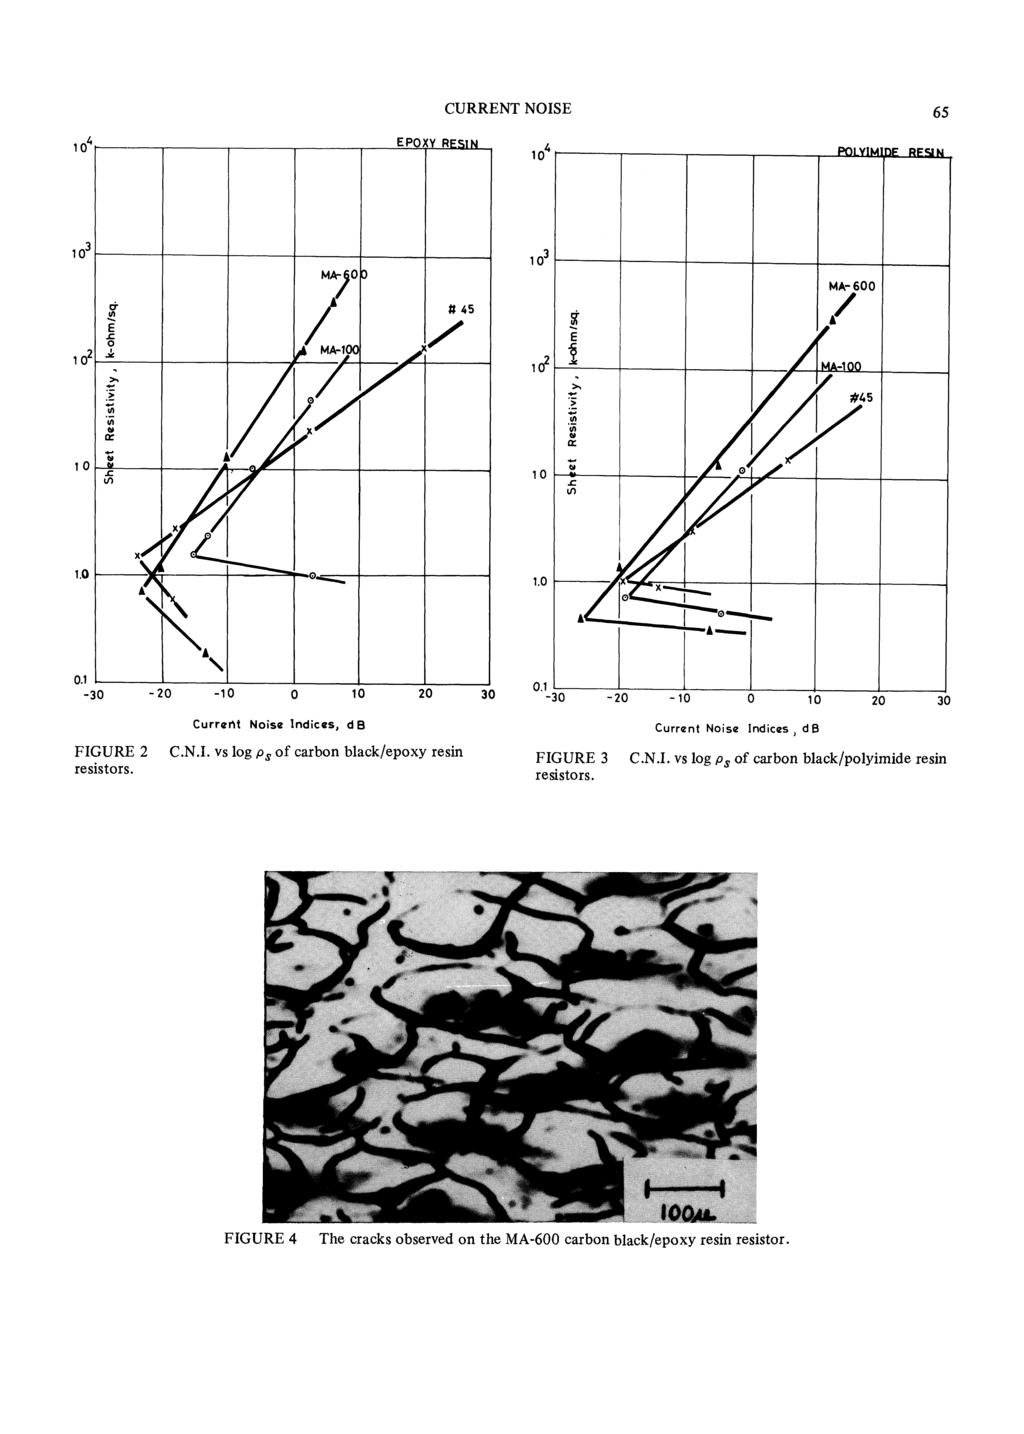 CURRENT NOISE 65 10 4 EPOXY o MA- 600 / -,oo 0.1-30 -20-10 0 10 20 30-30 -20 10 0 10 20 FIGURE 2 Current Noise Indices, db C.N.I. vs log ps of carbon black/epoxy resin FIGURE 3 Current Noise Indices d B C.